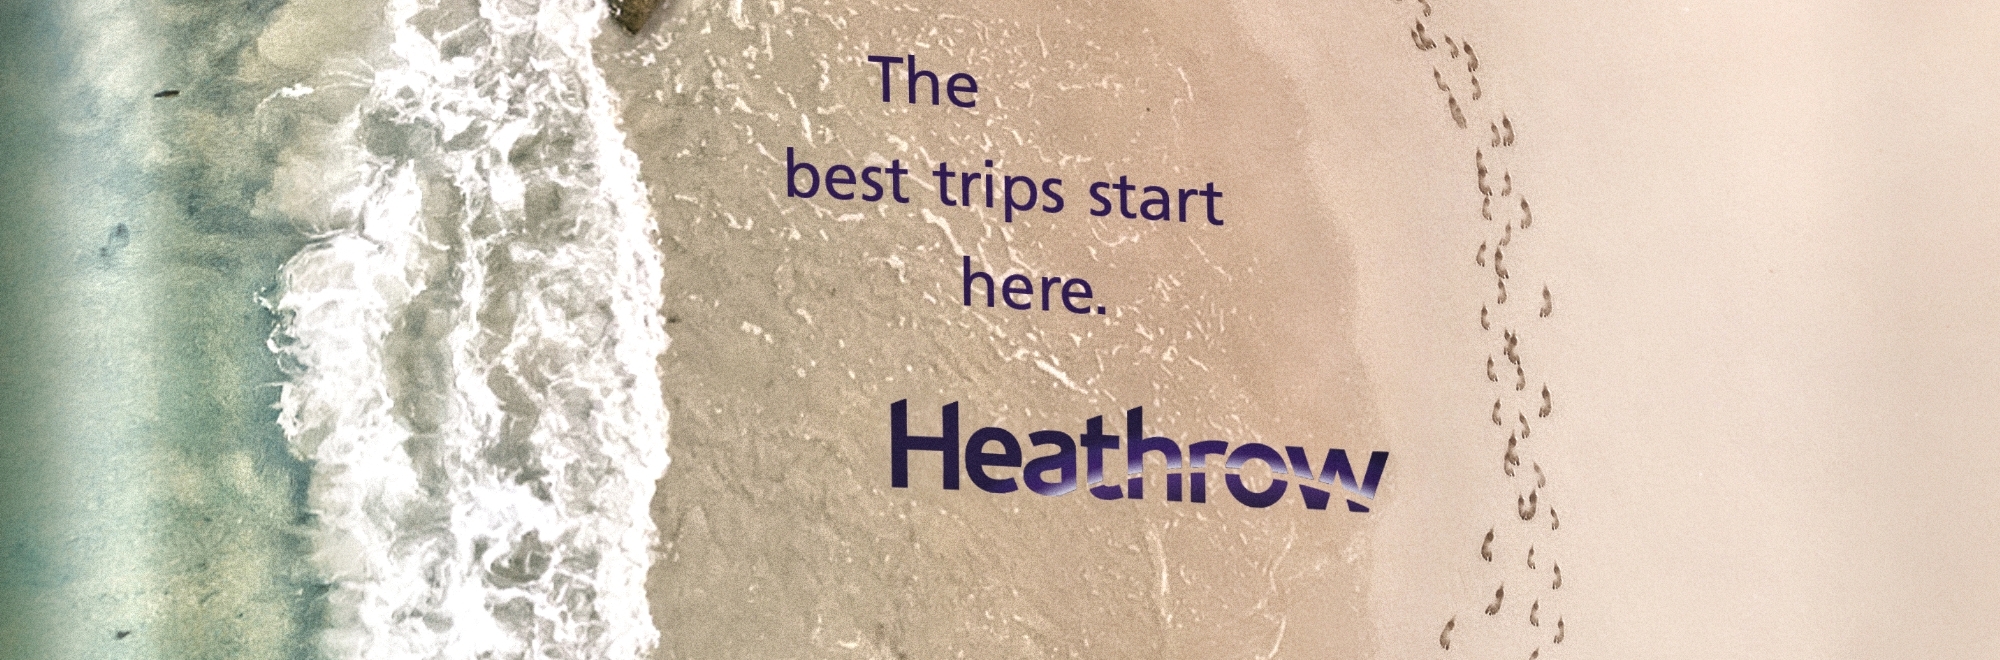 Heathrow Airport uses symmetry of flightpaths to highlight African destinations